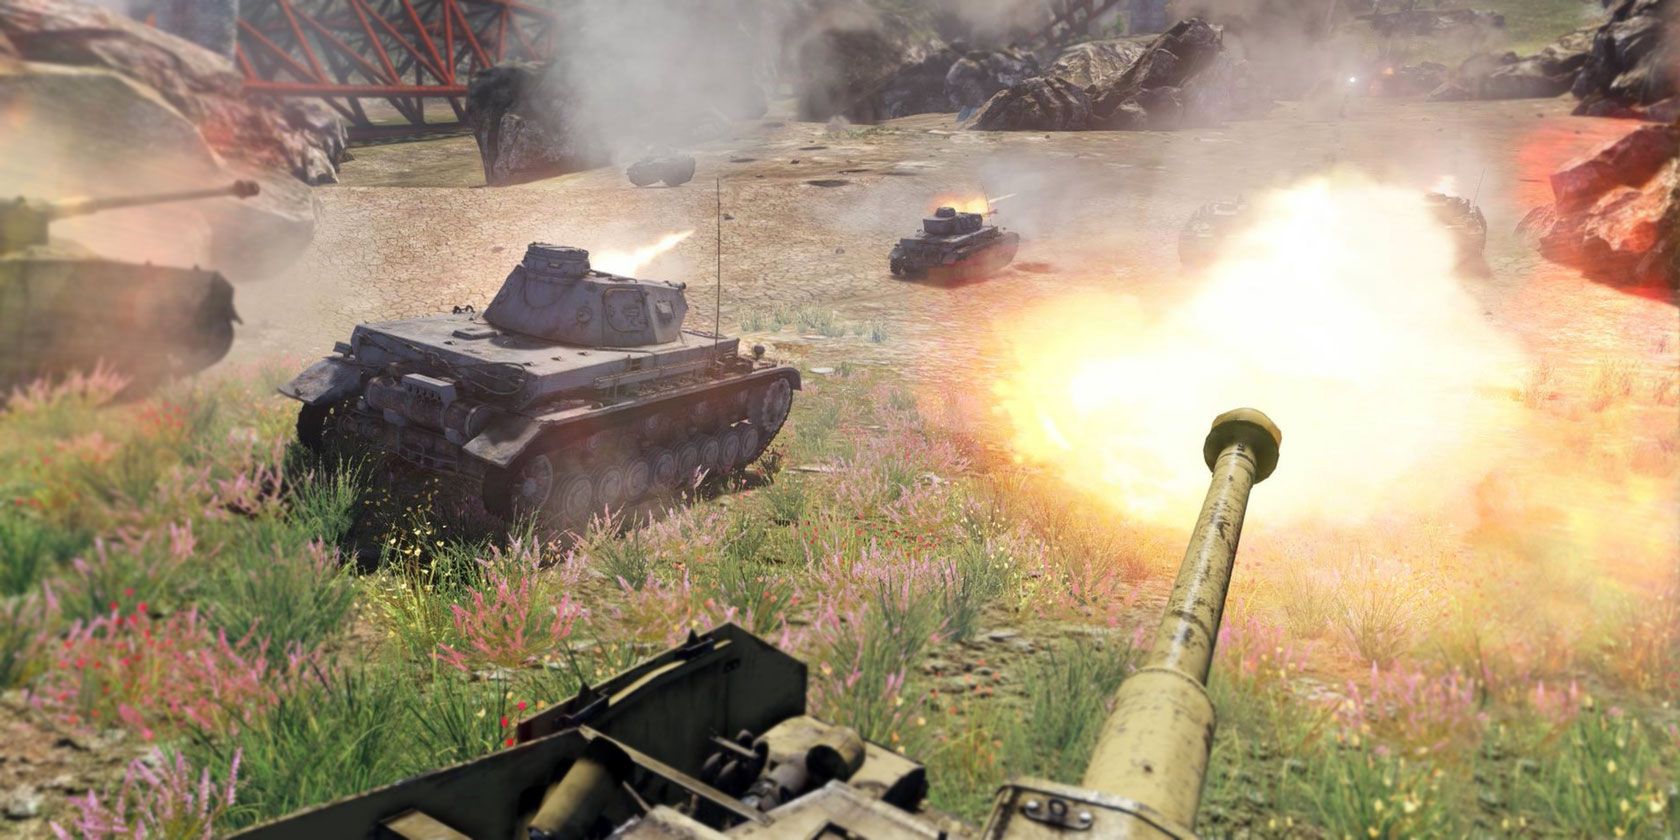 The Best Tank Games to Play Right Now